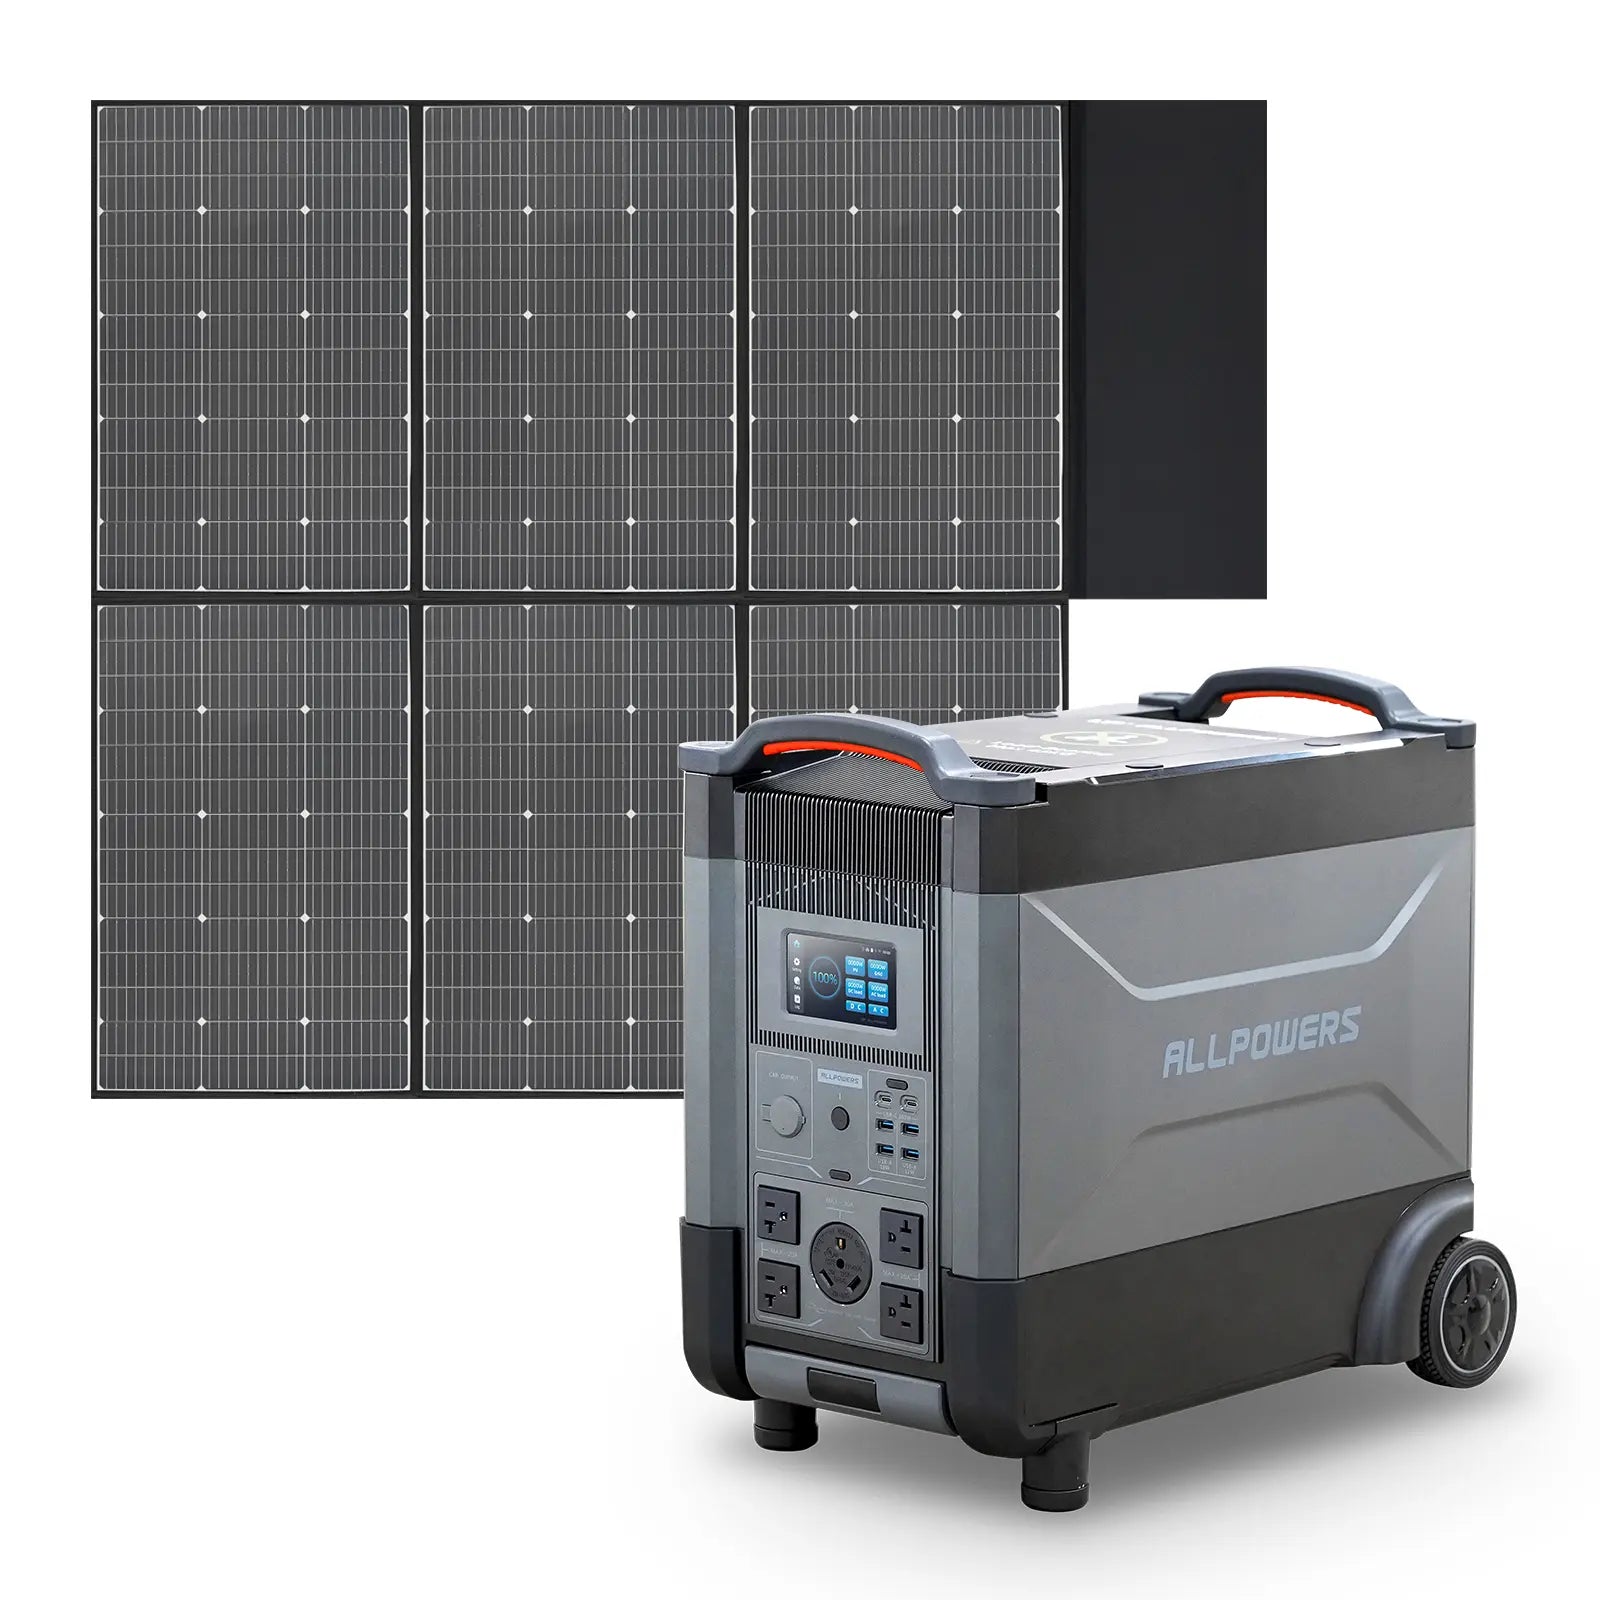 ALLPOWERS R4000 Portable Power Station 4000W 3600Wh (R4000 + SP039 600W Solar Panel)